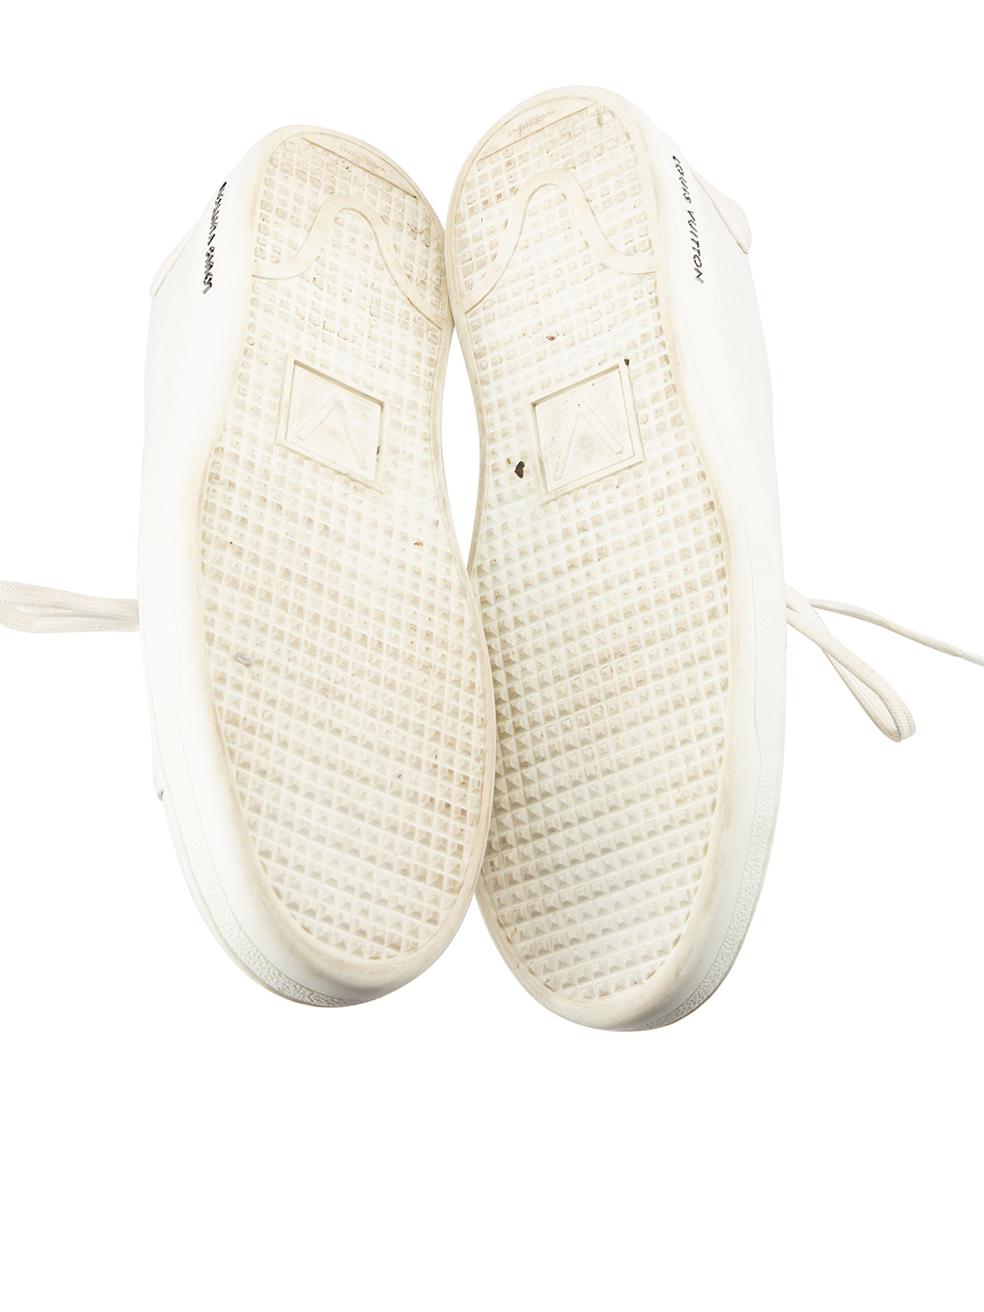 White Leather Croc Embossed Frontrow Trainers Size UK 8.5 In Good Condition For Sale In London, GB